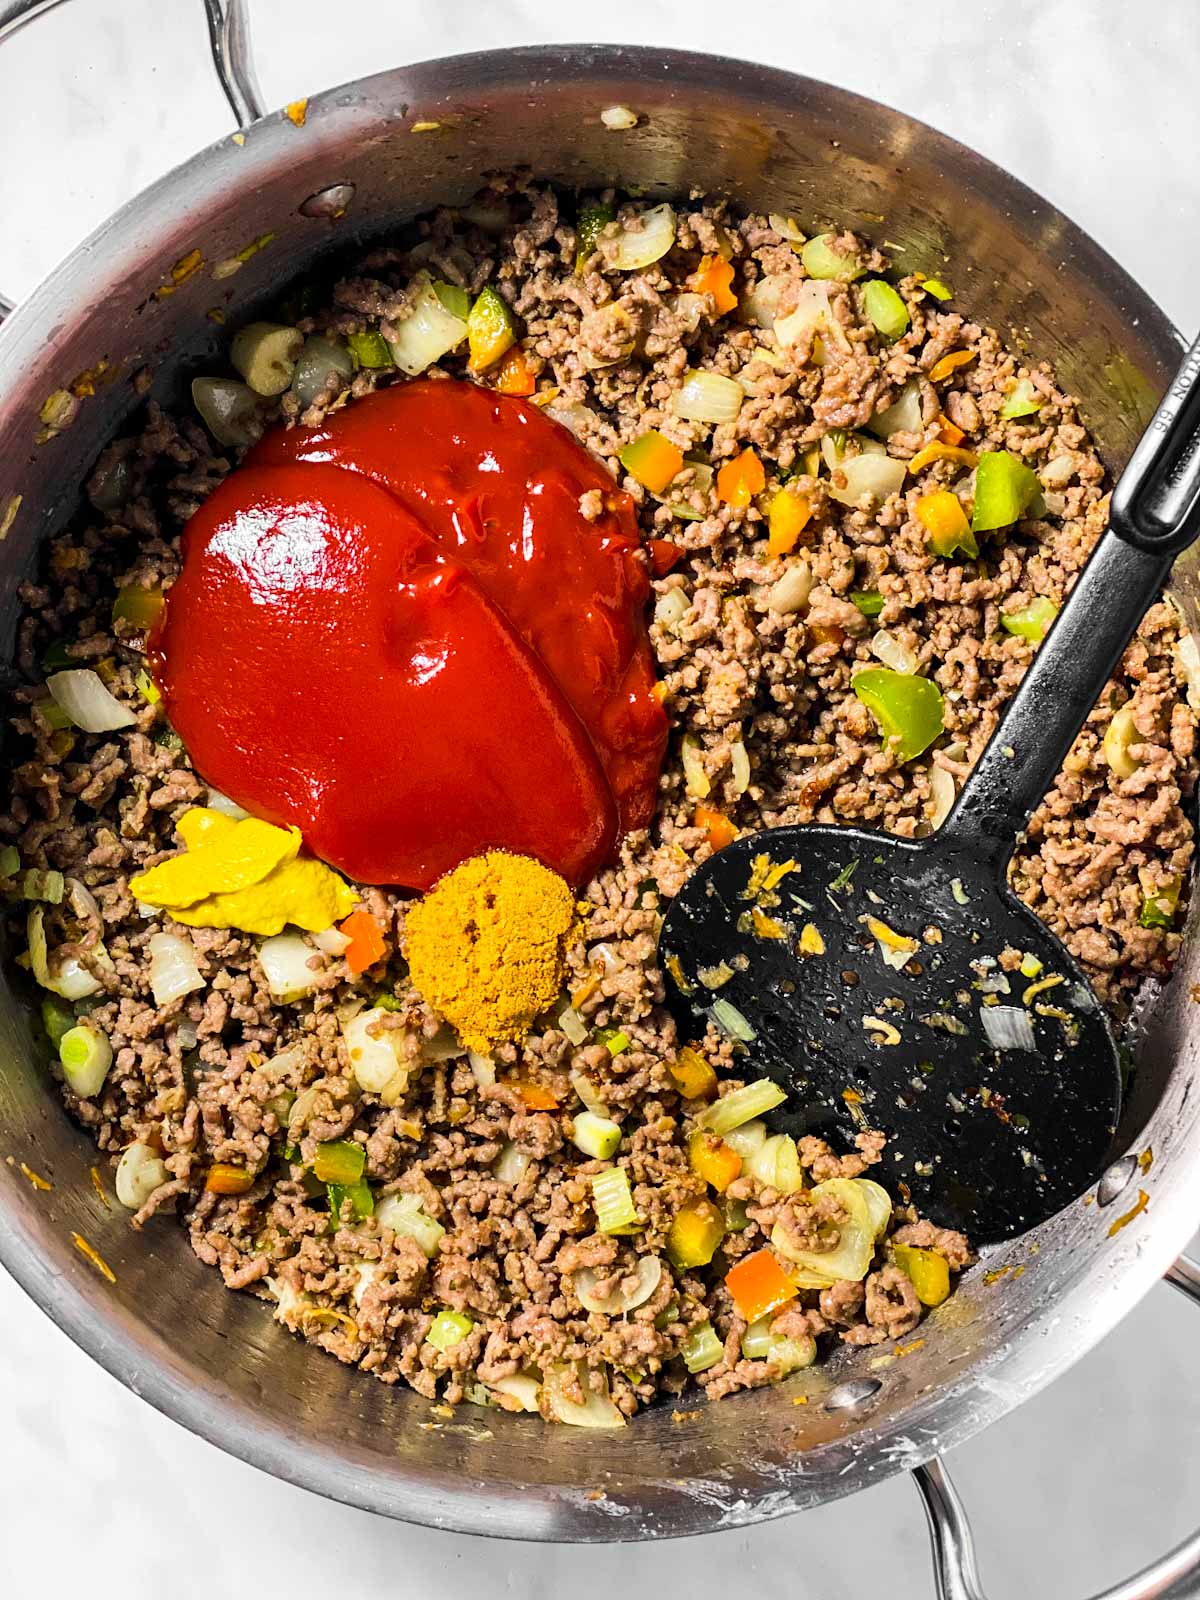 browned ground beef ad vegetables in skillet with ketchup, mustard, brown sugar and black cooking spoon